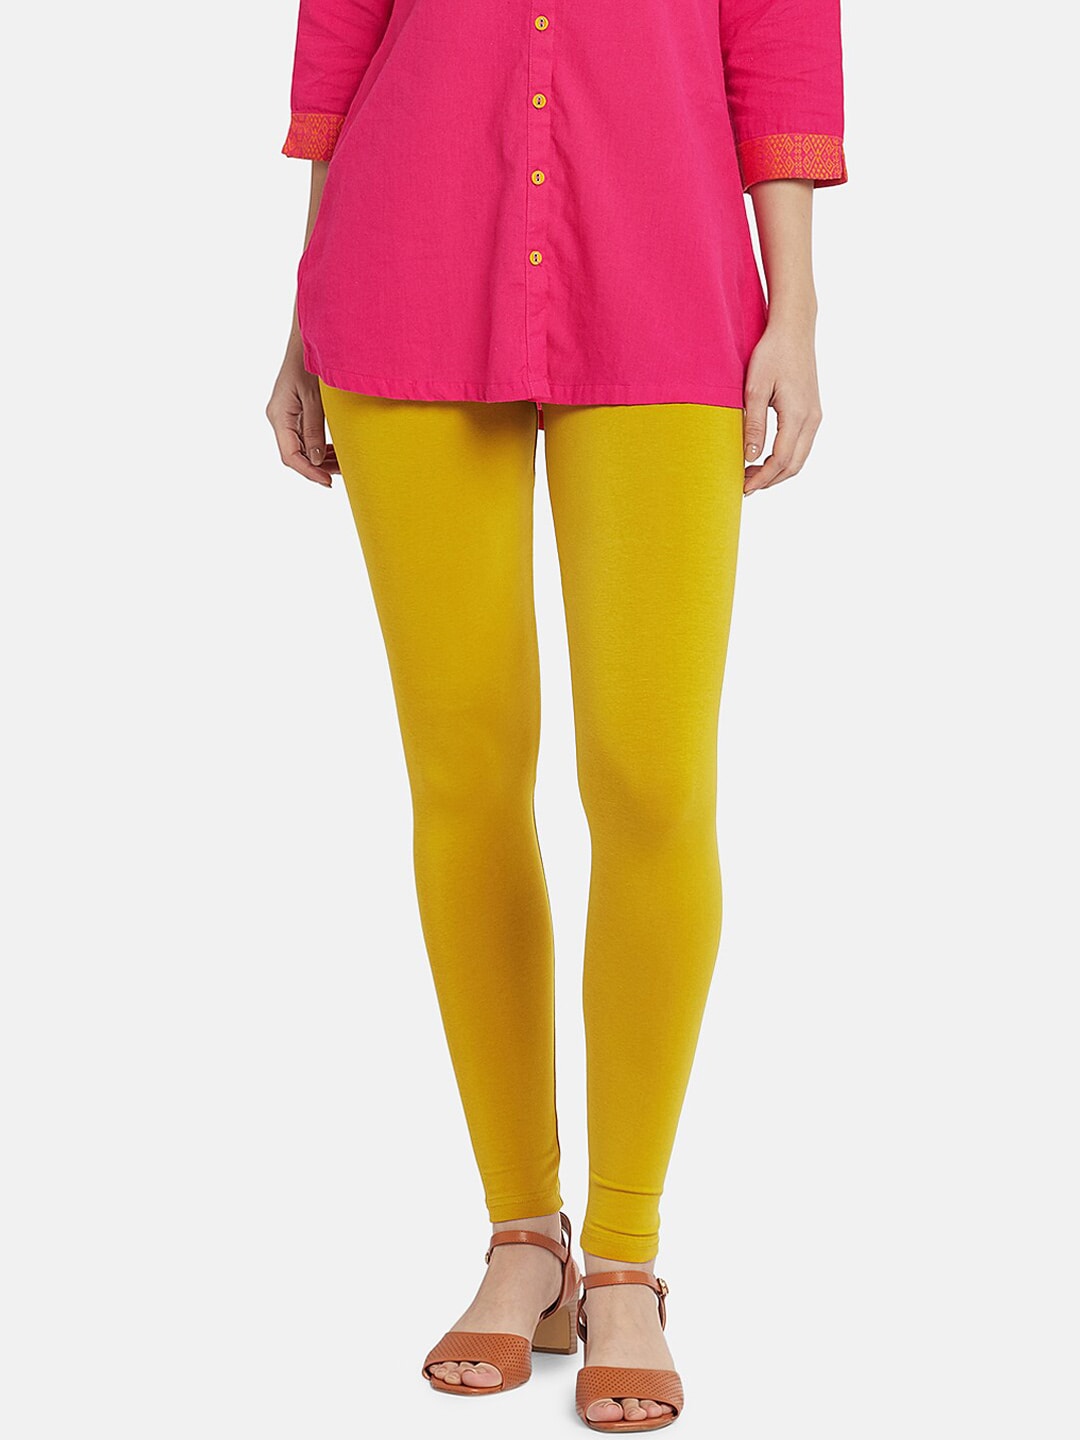 Go Colors Women Mustard Yellow Solid Ankle Length Slim Fit Leggings Price in India